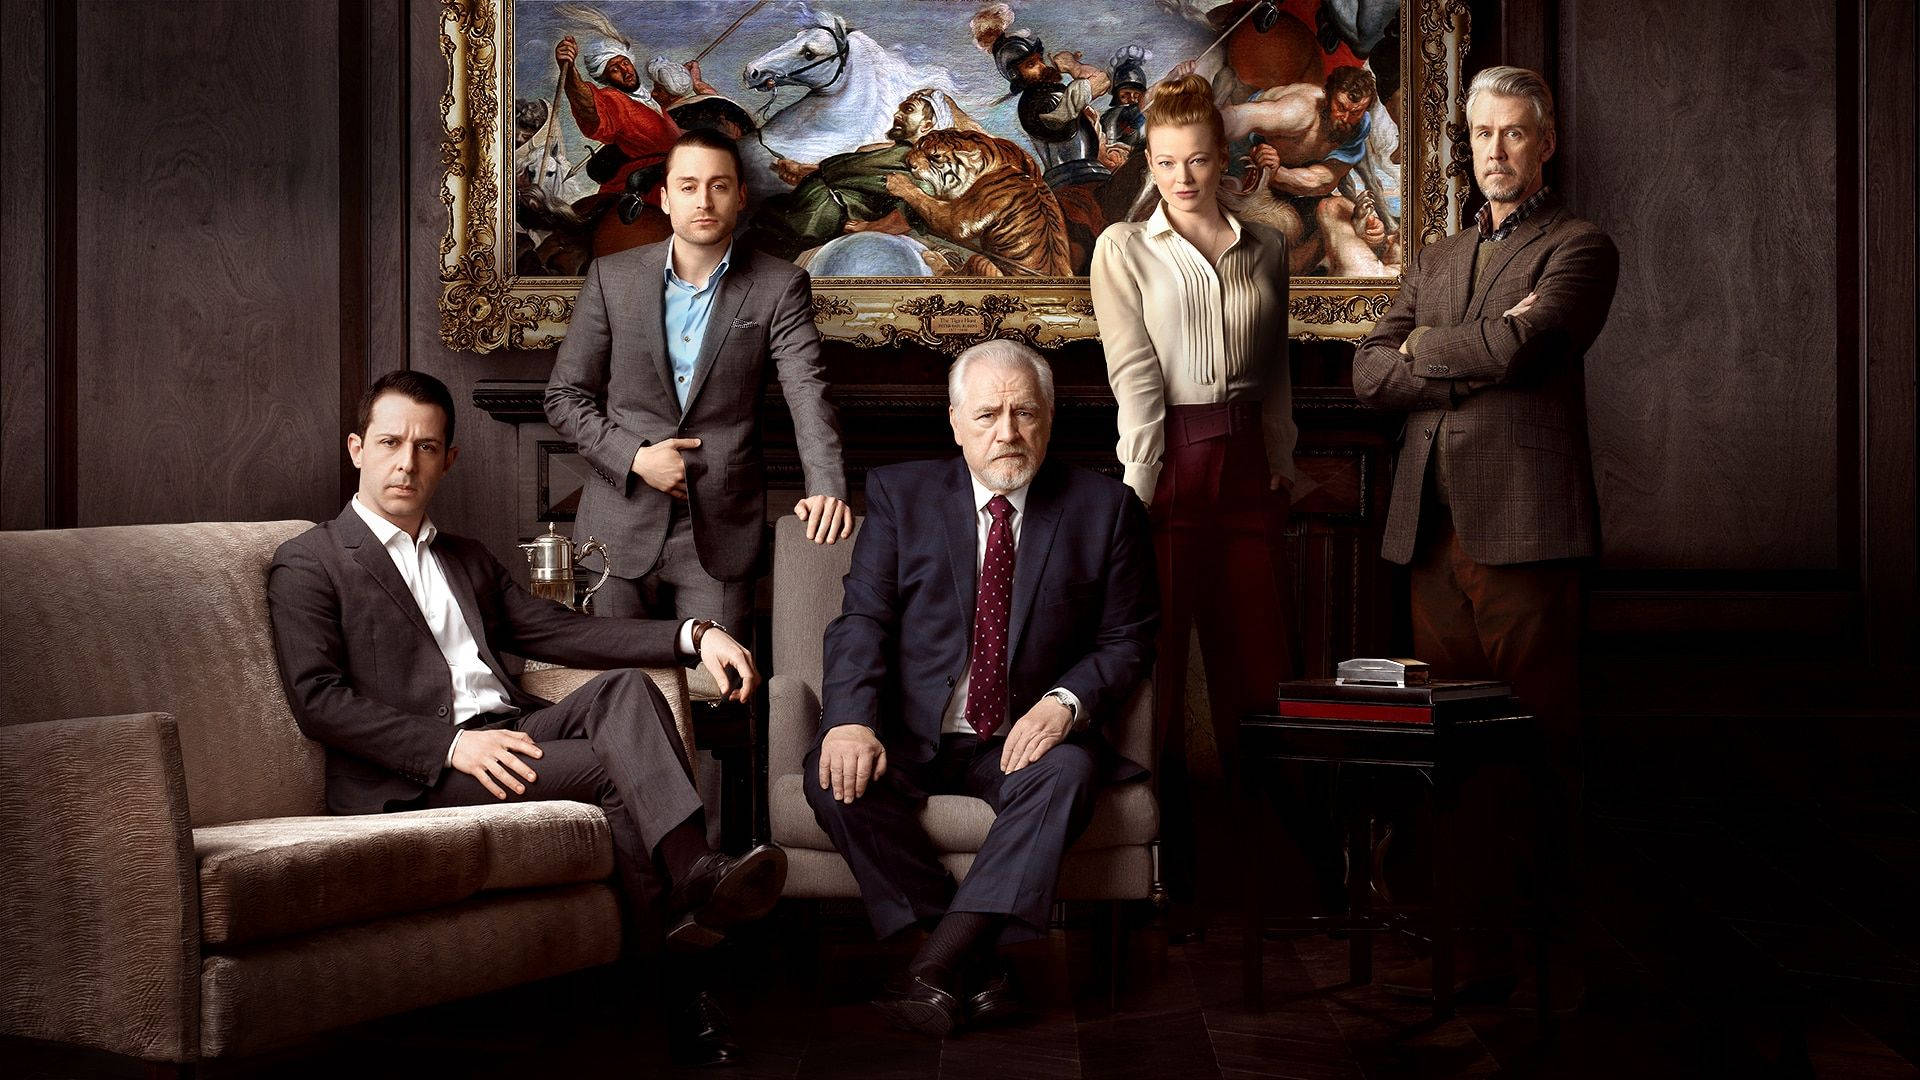 Roy Family Gathering In Fancy Living Room In Hbo's Succession